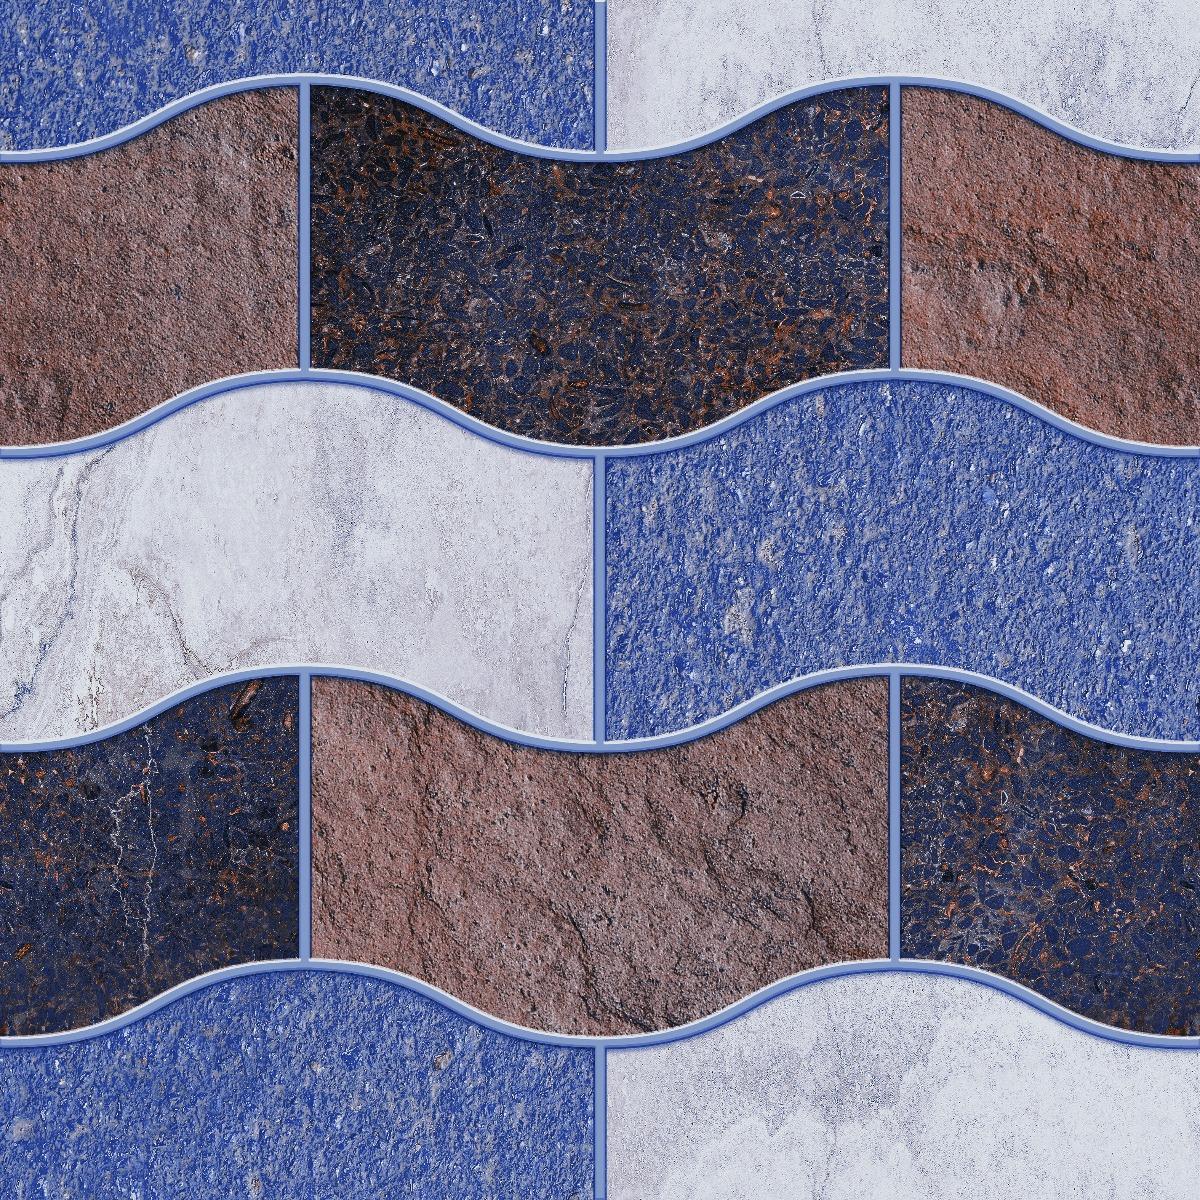 Blue Tiles for Balcony Tiles, Swimming Pool Tiles, Parking Tiles, Pathway Tiles, Commercial/Office, Outdoor Area